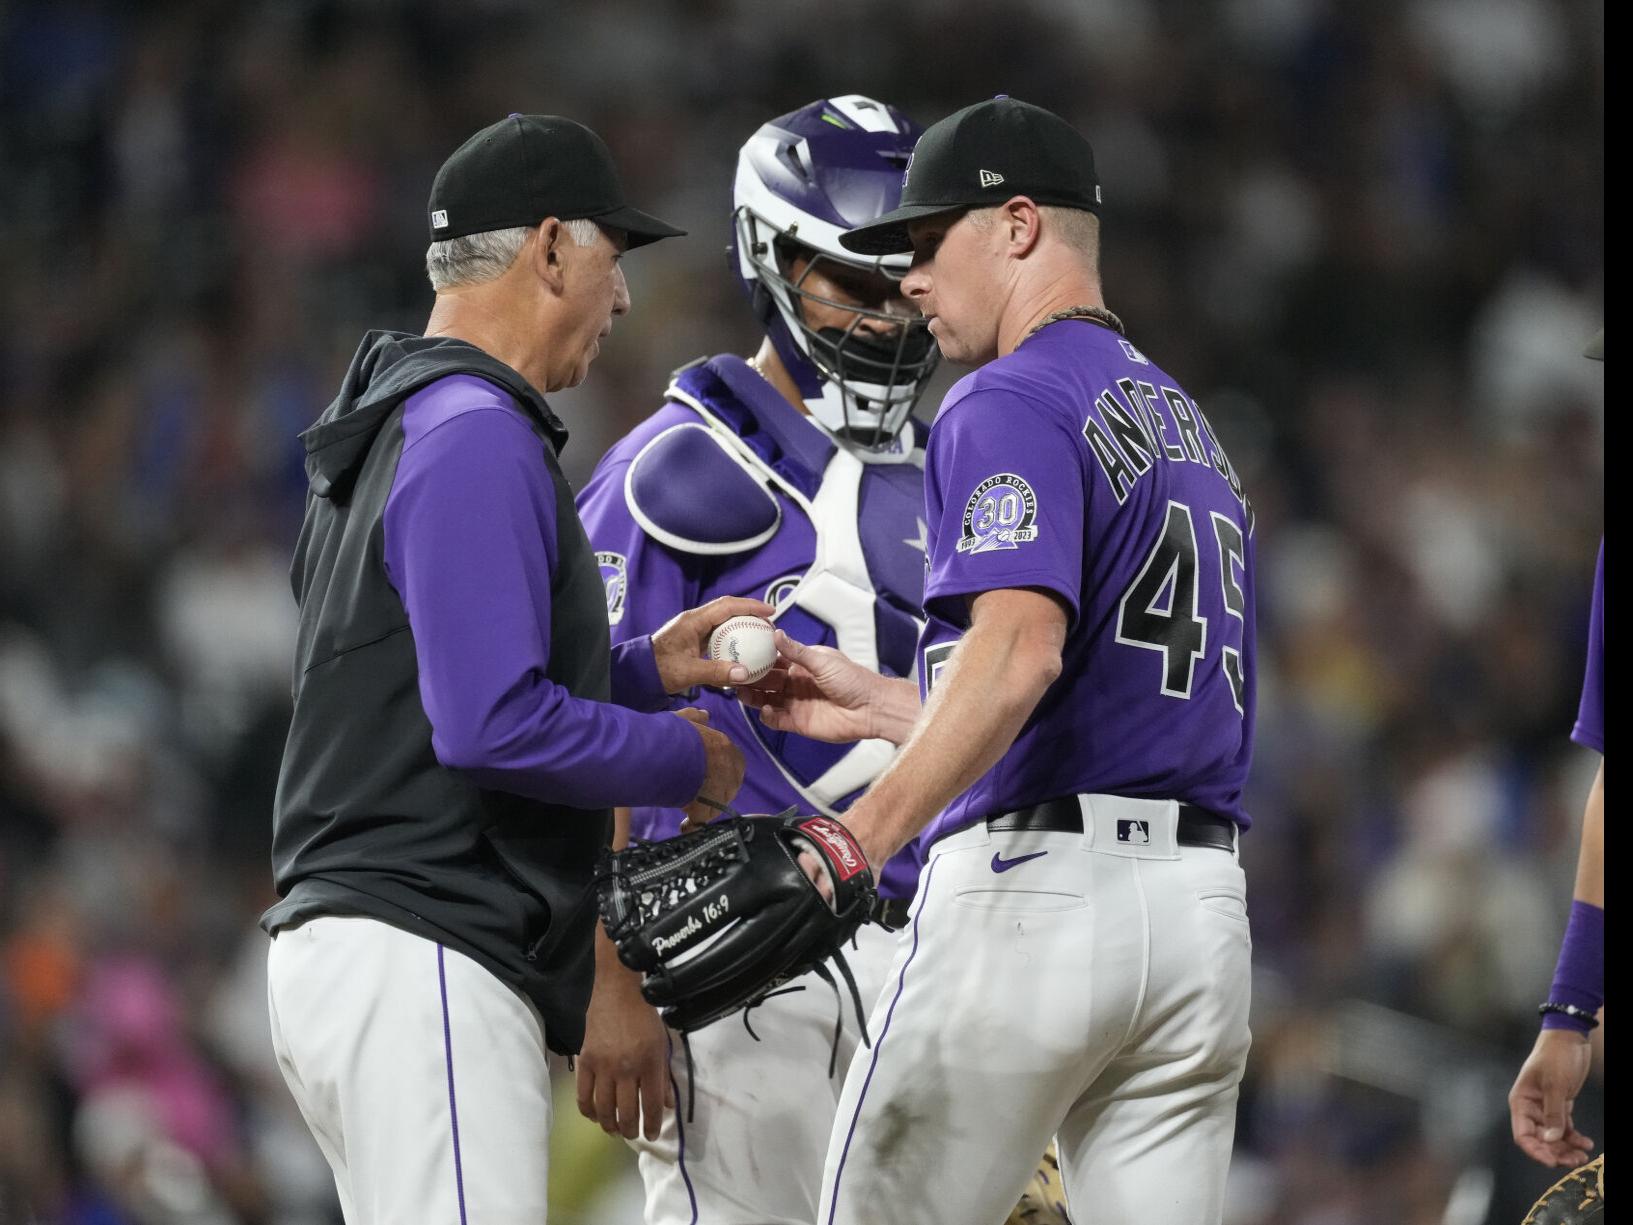 The Colorado Rockies have ditched their most iconic look - Denver